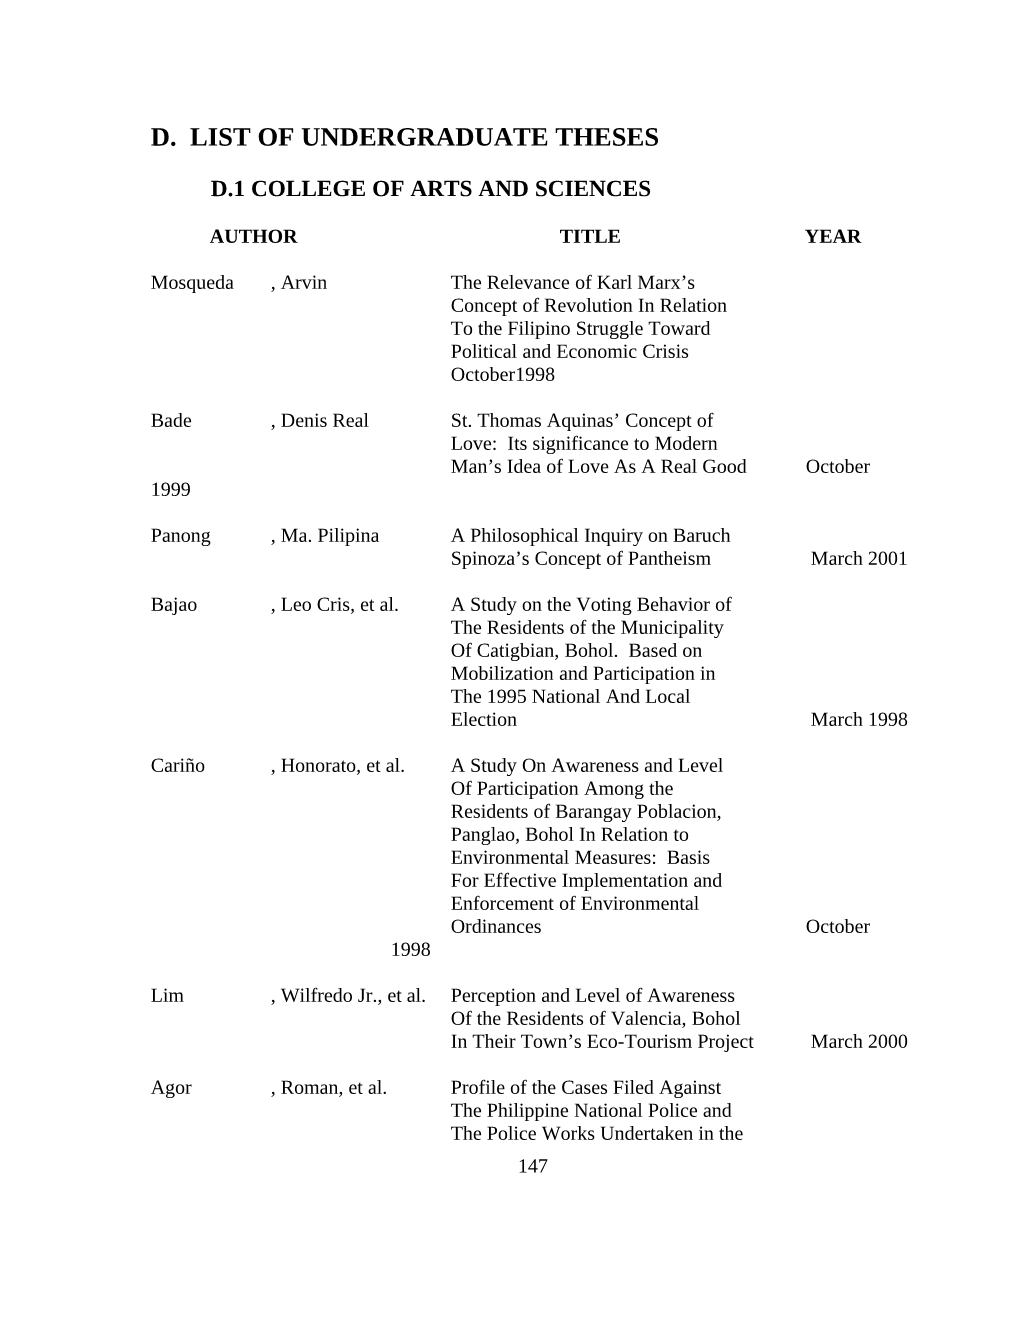 List of Undergraduate Theses of the College of Arts And